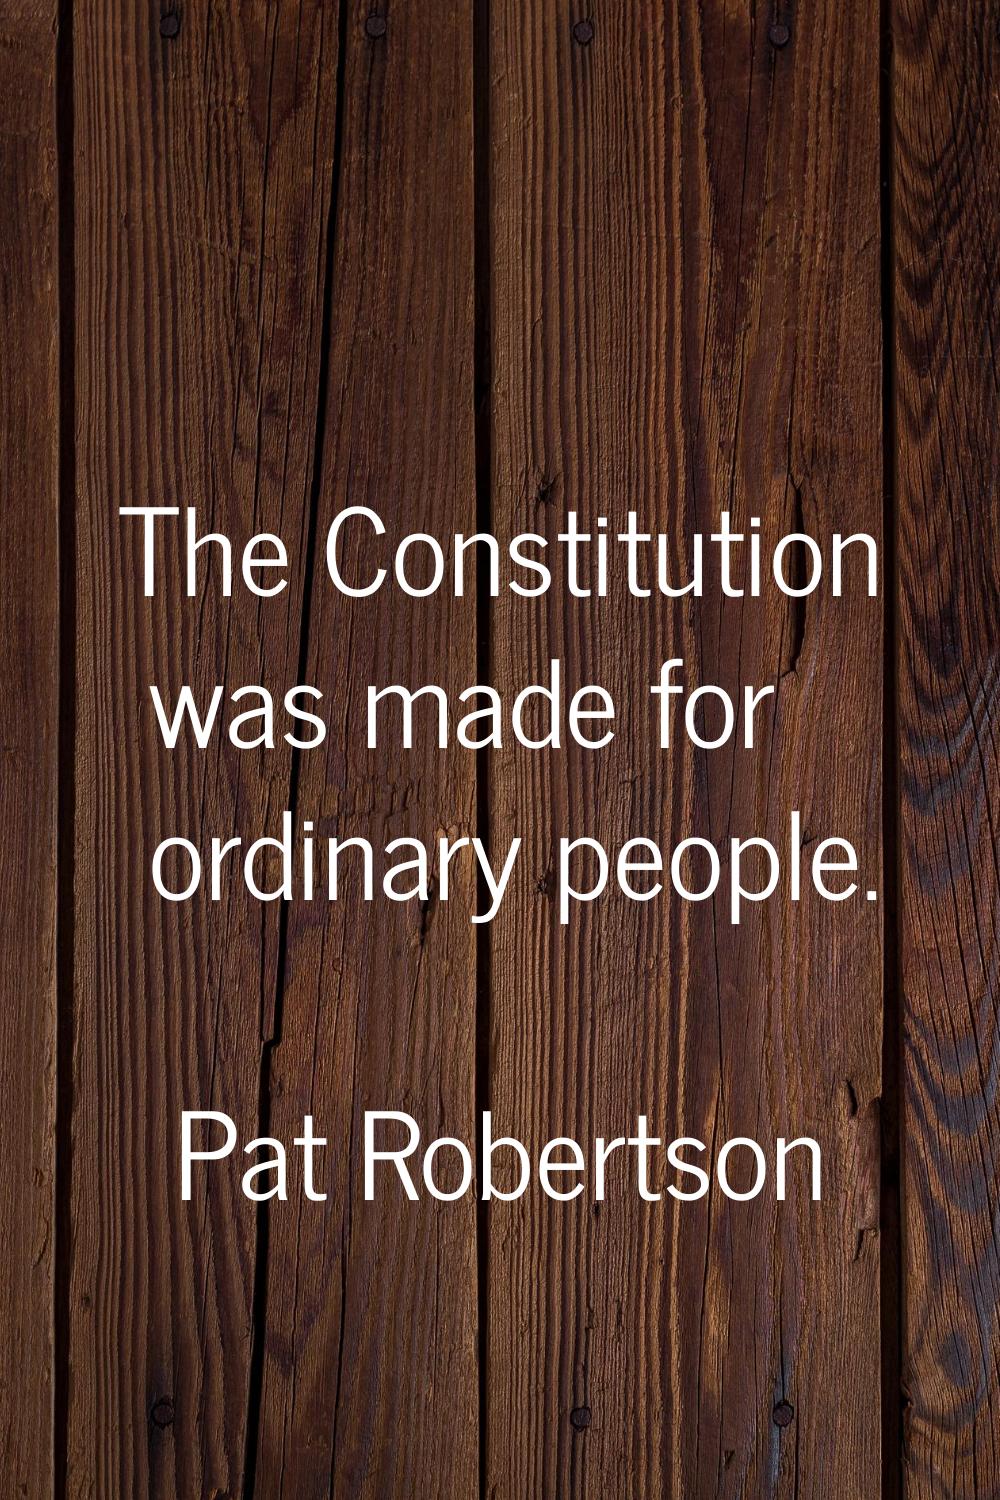 The Constitution was made for ordinary people.